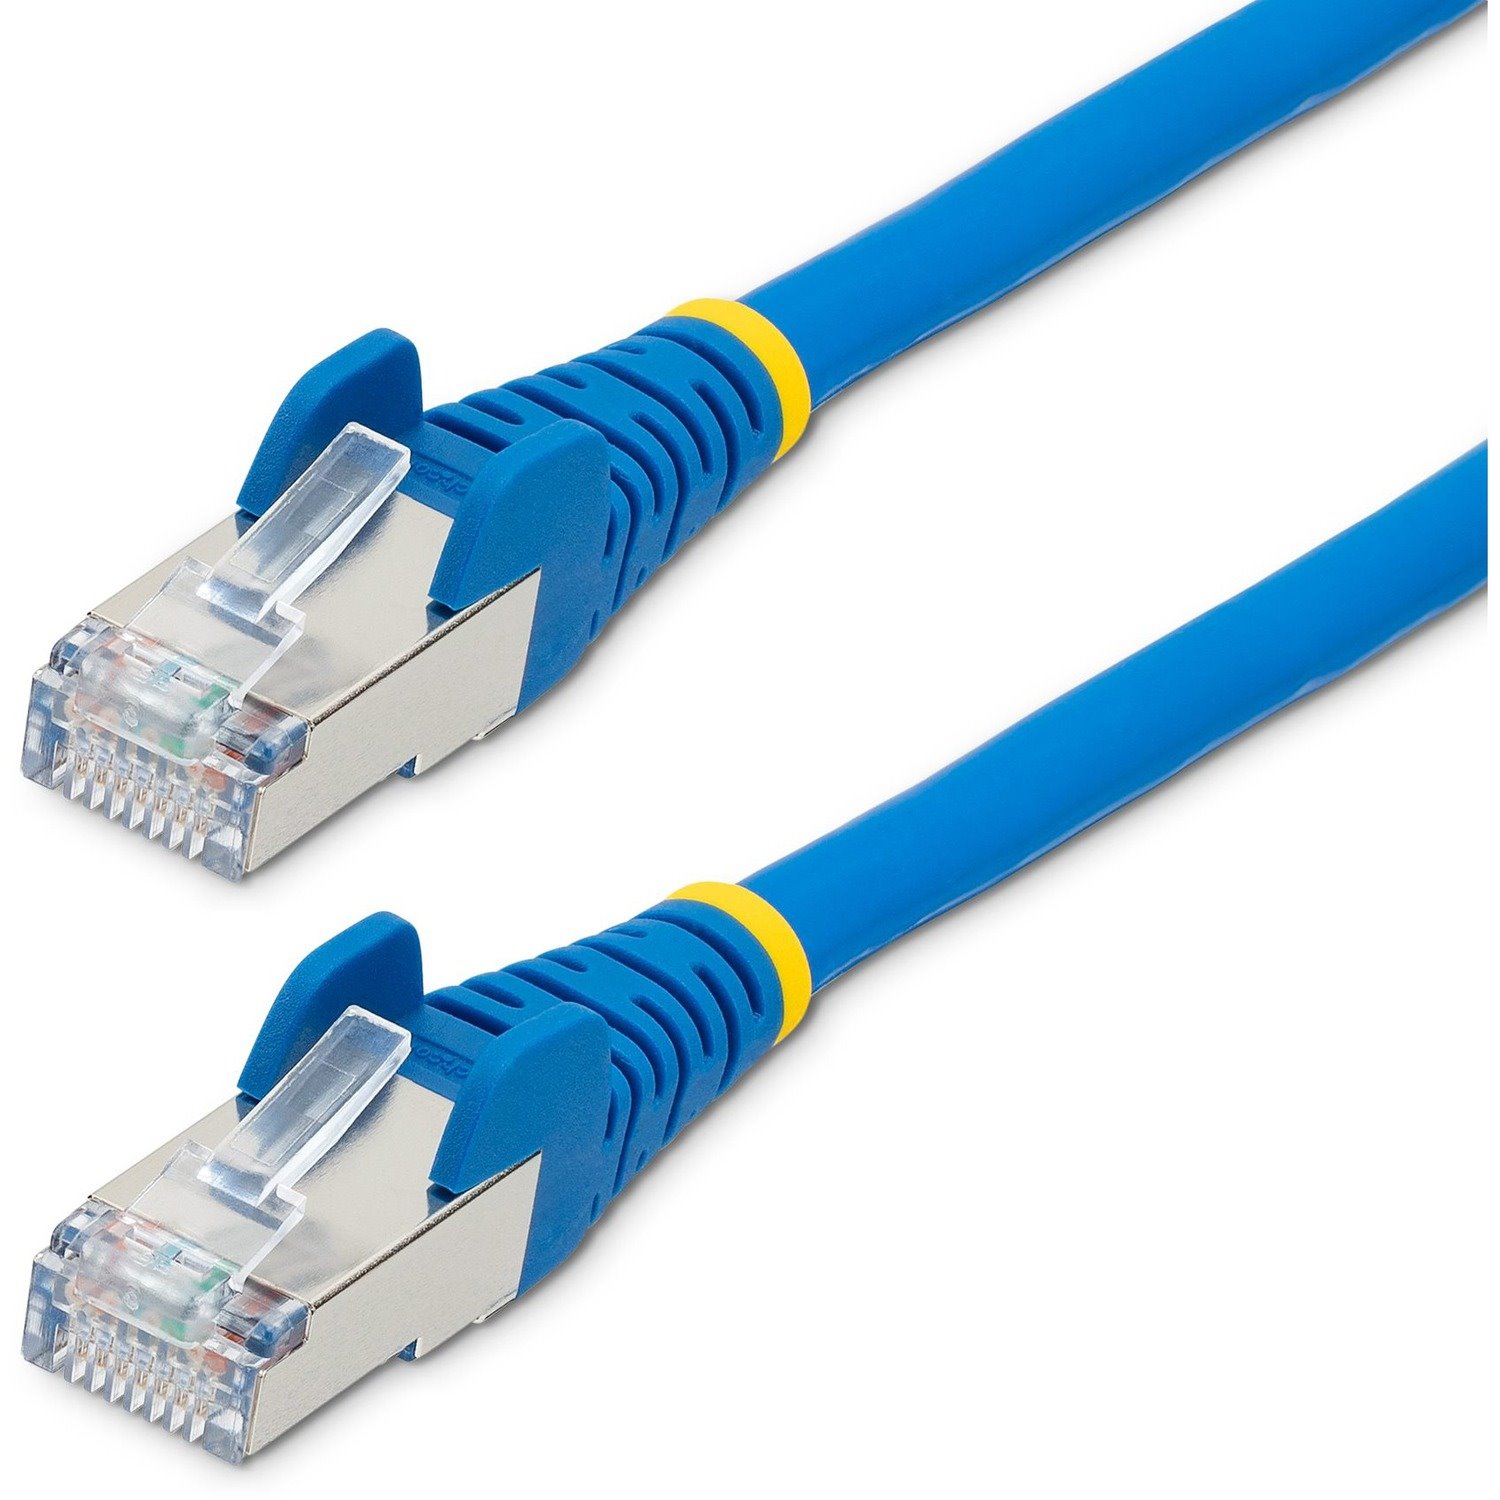 StarTech.com 2m CAT6a Ethernet Cable, Blue Low Smoke Zero Halogen (LSZH) 10 GbE 100W PoE S/FTP Snagless RJ-45 Network Patch Cord